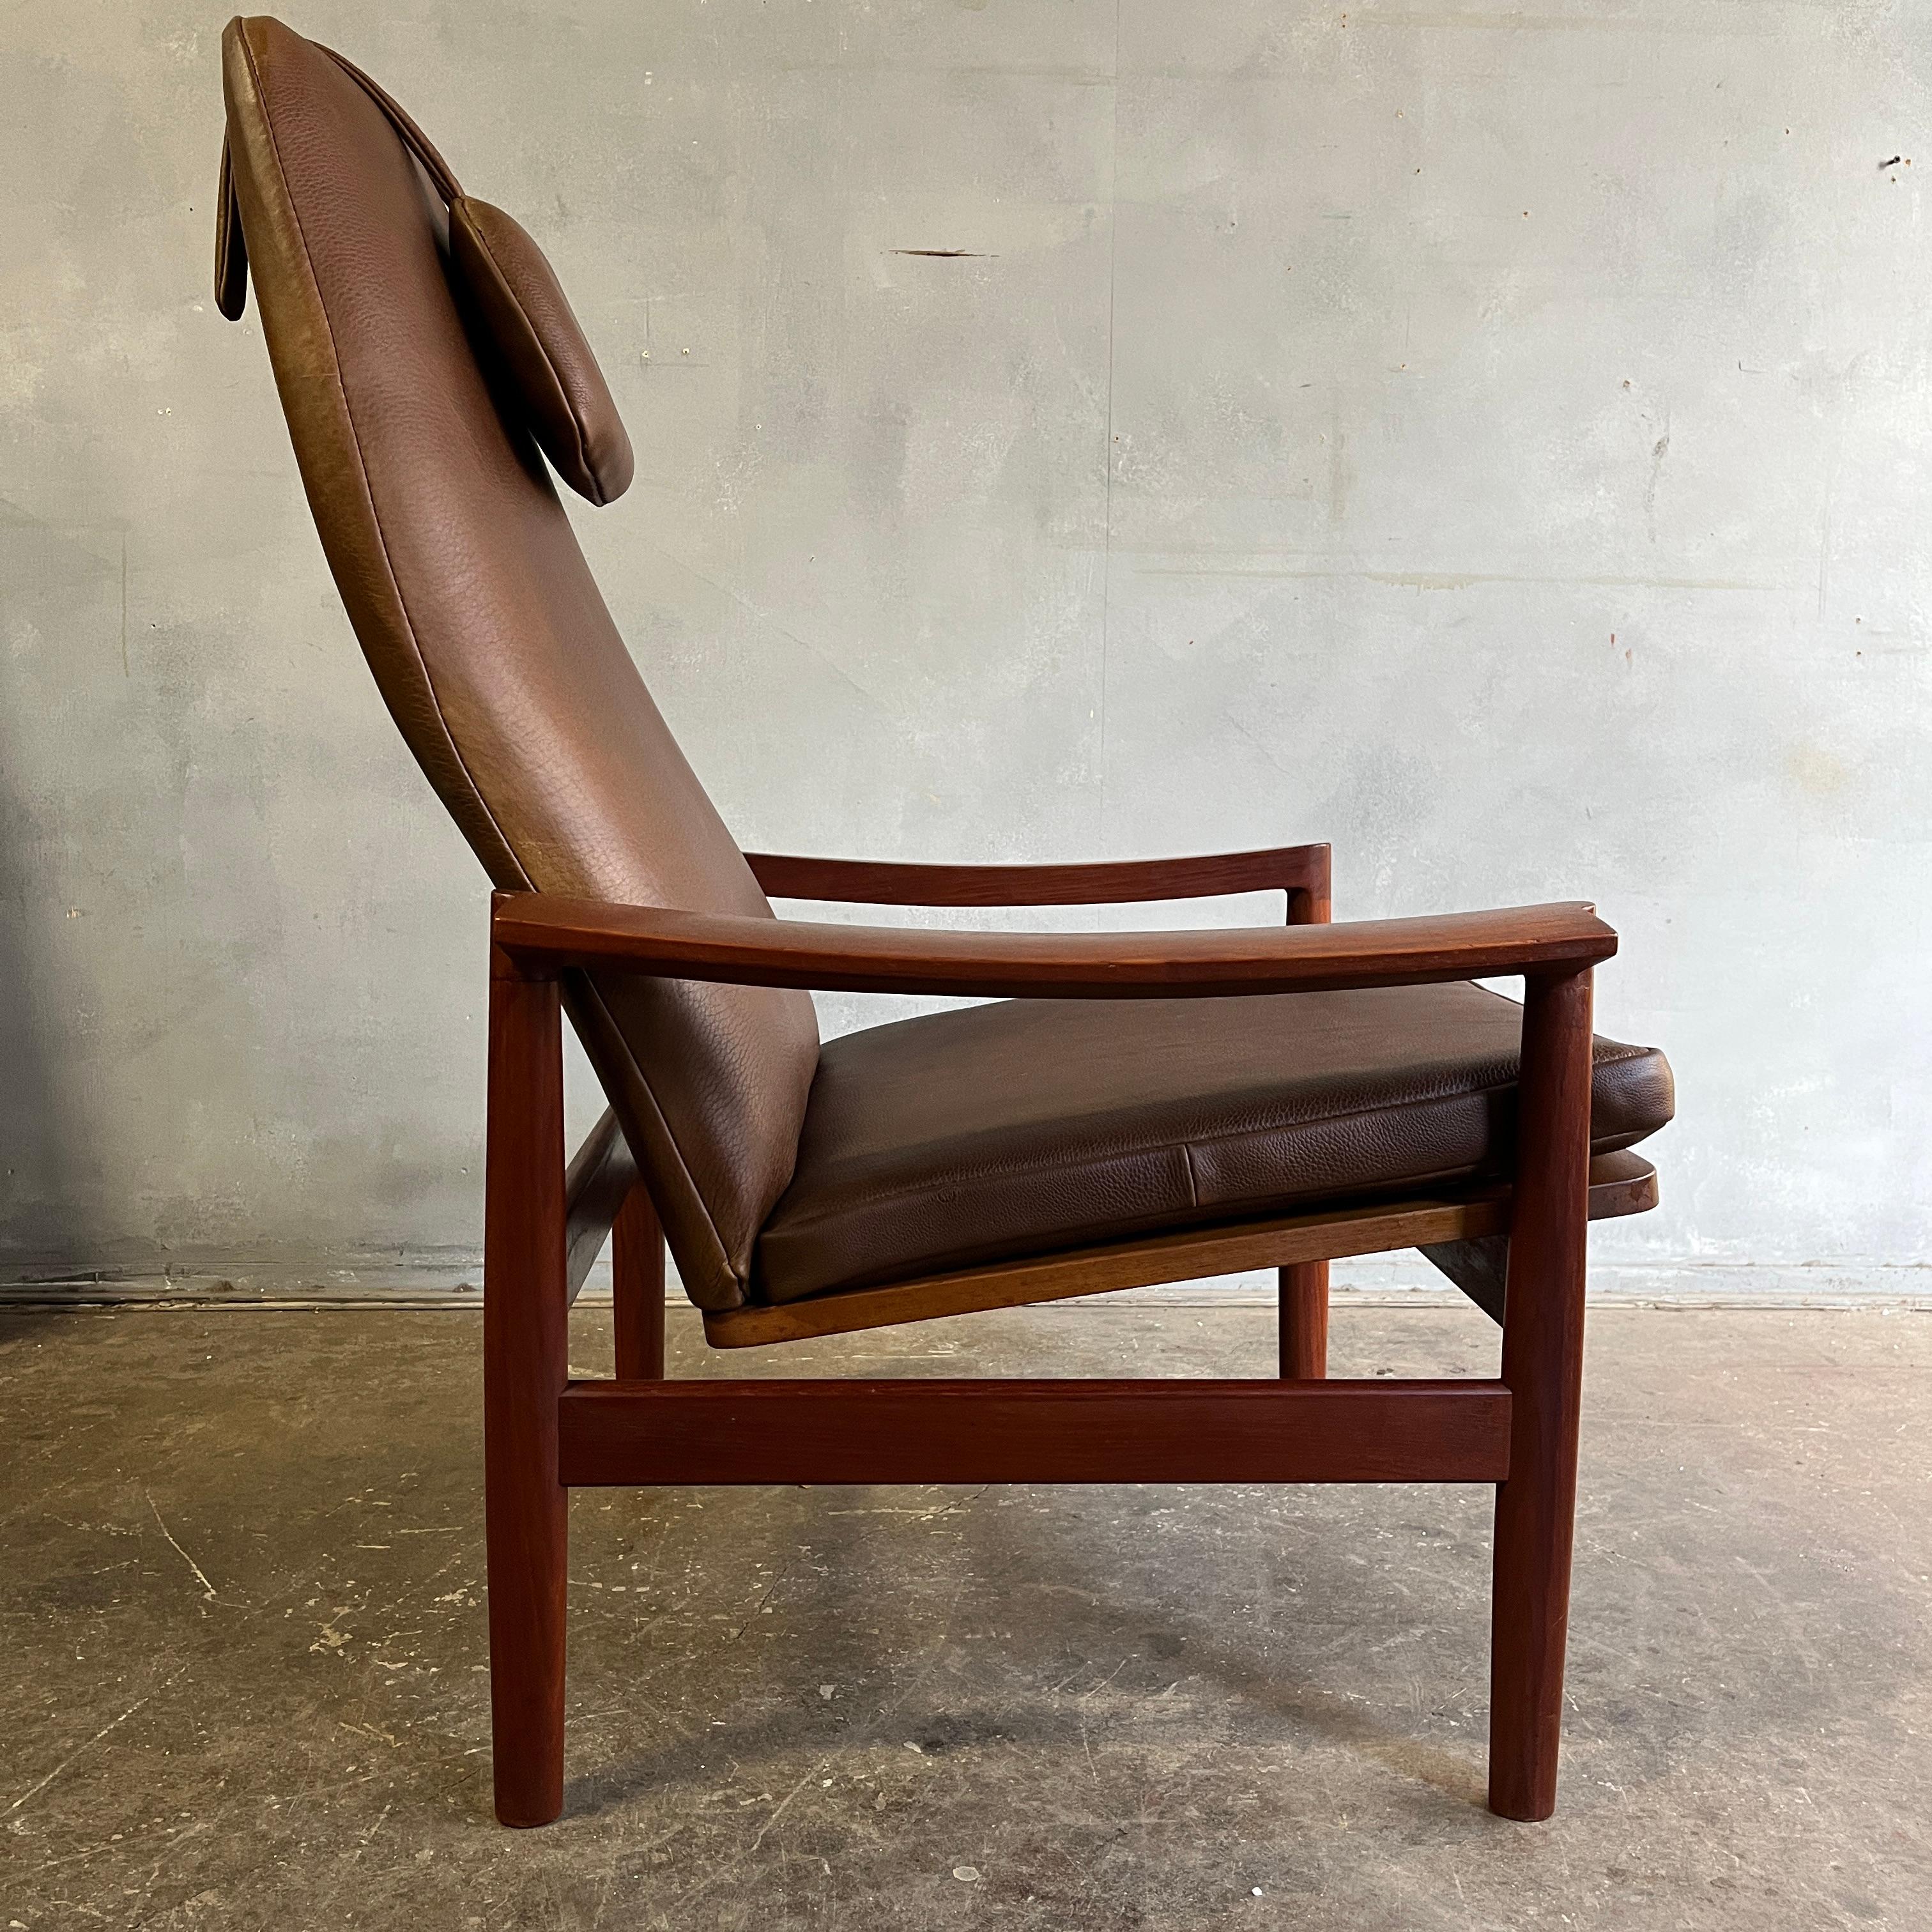 Midcentury Lounge chair Teak and Leather For Sale 3